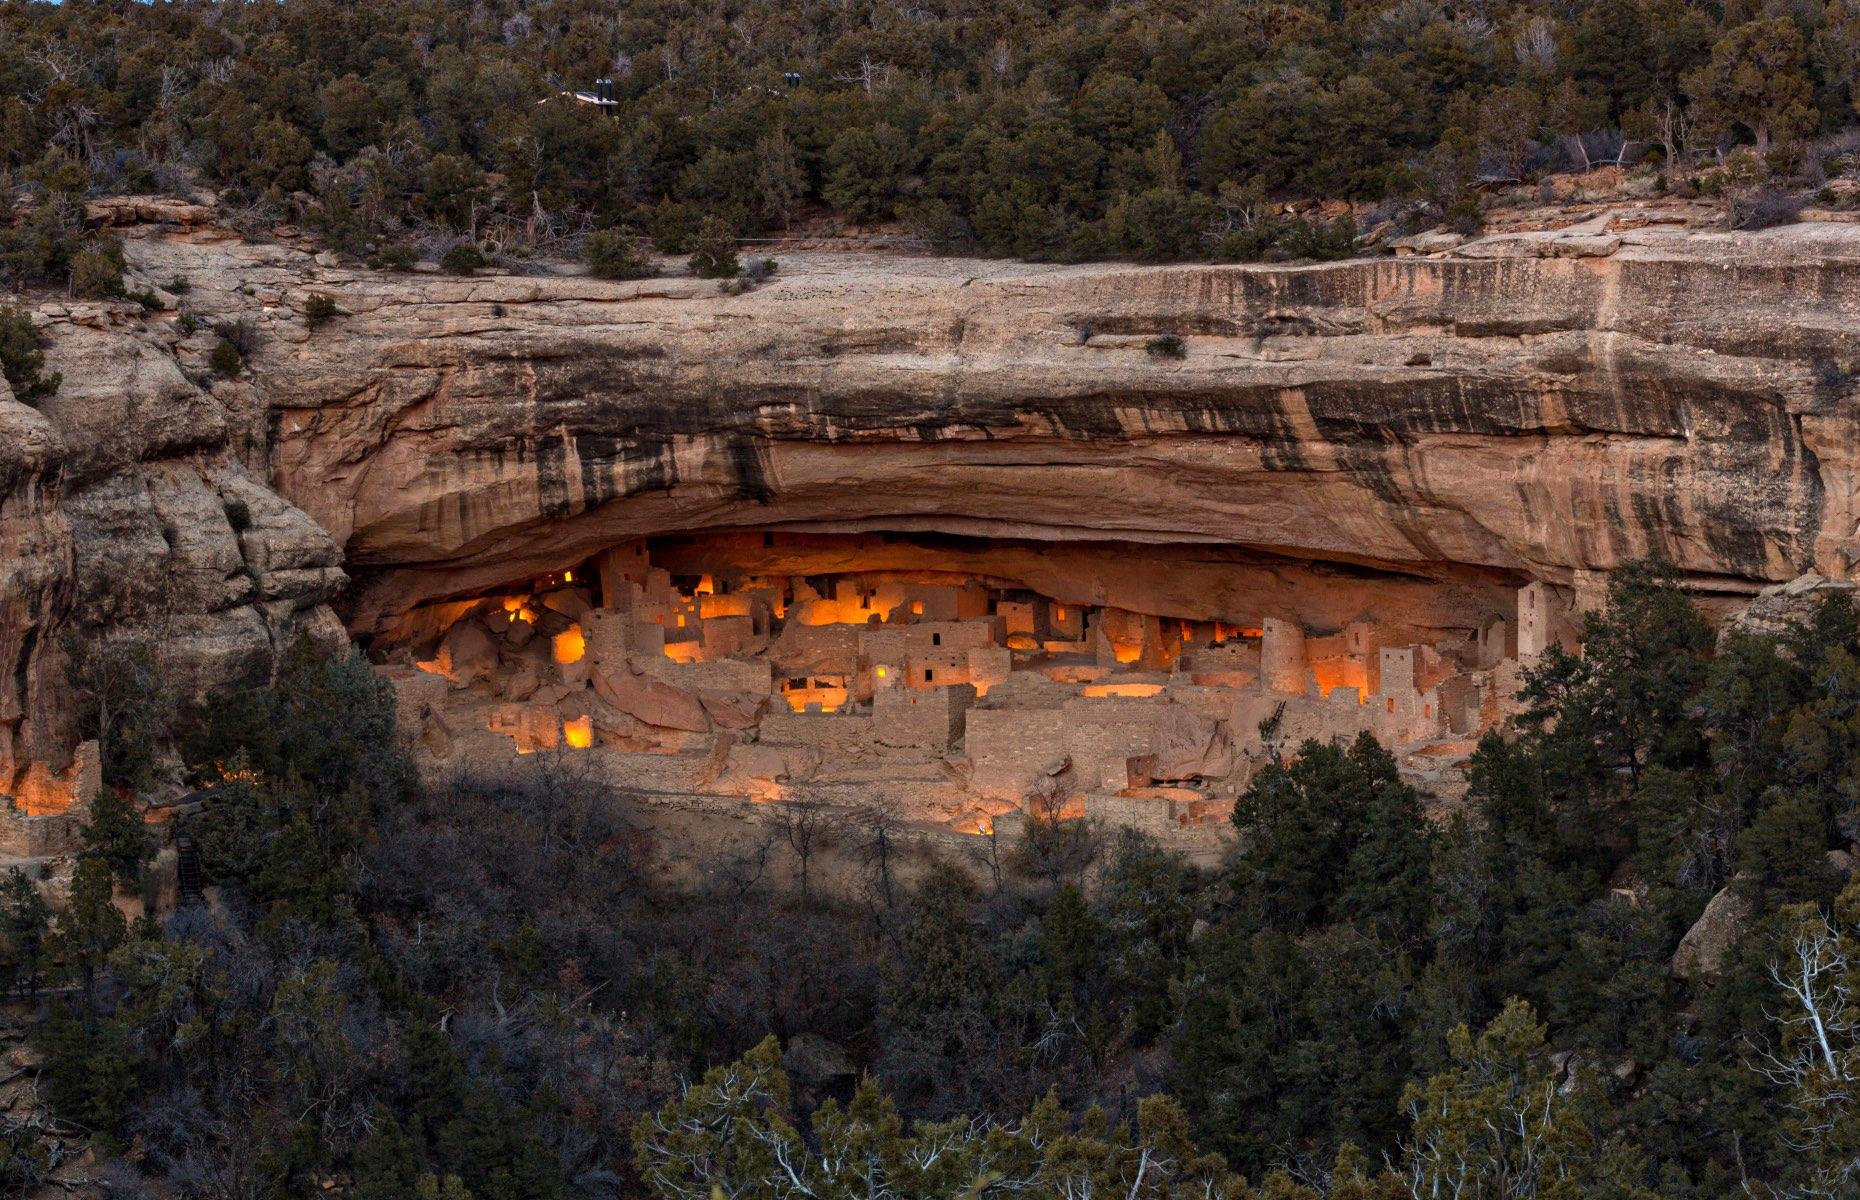 <p>After word got out that the dwellings had been found, explorers raided the sites for artifacts – and this went on for years. Less than a decade after the ruins had been discovered, Mesa Verde was in danger of being destroyed by over-enthusiastic tourists and greedy souvenir seekers.</p>